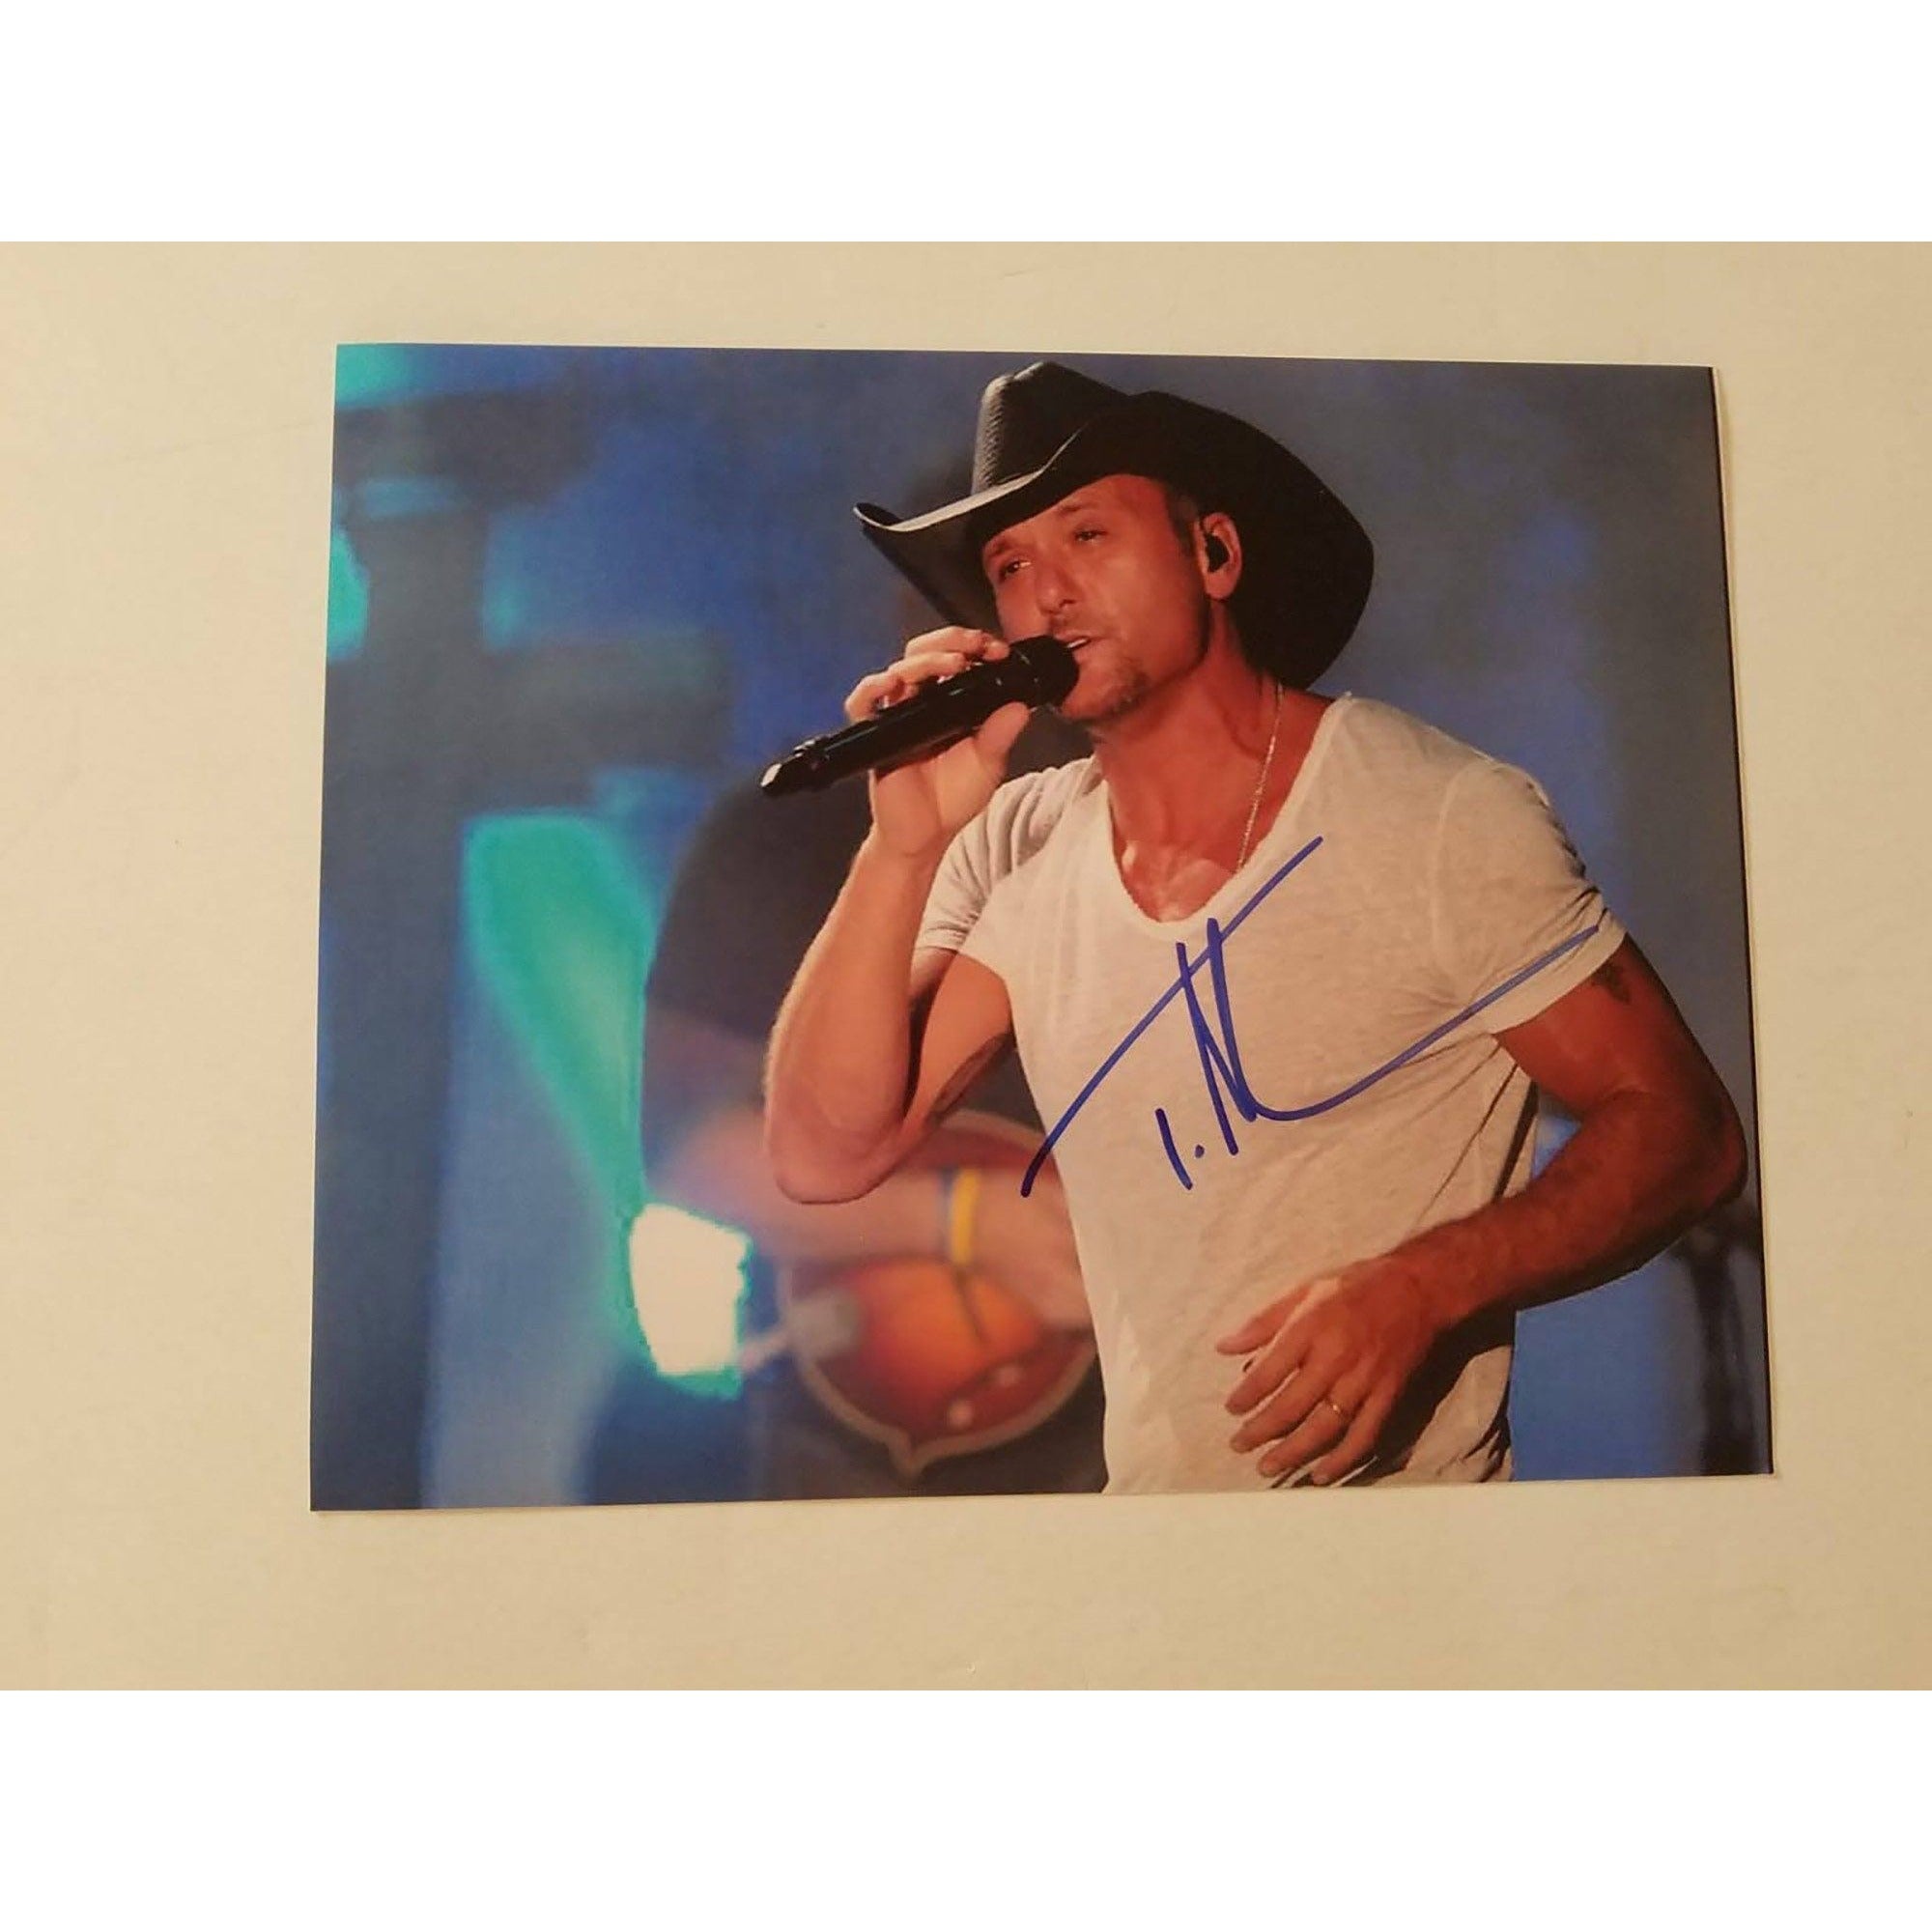 Tim McGraw 8 x 10 signed photo with proof